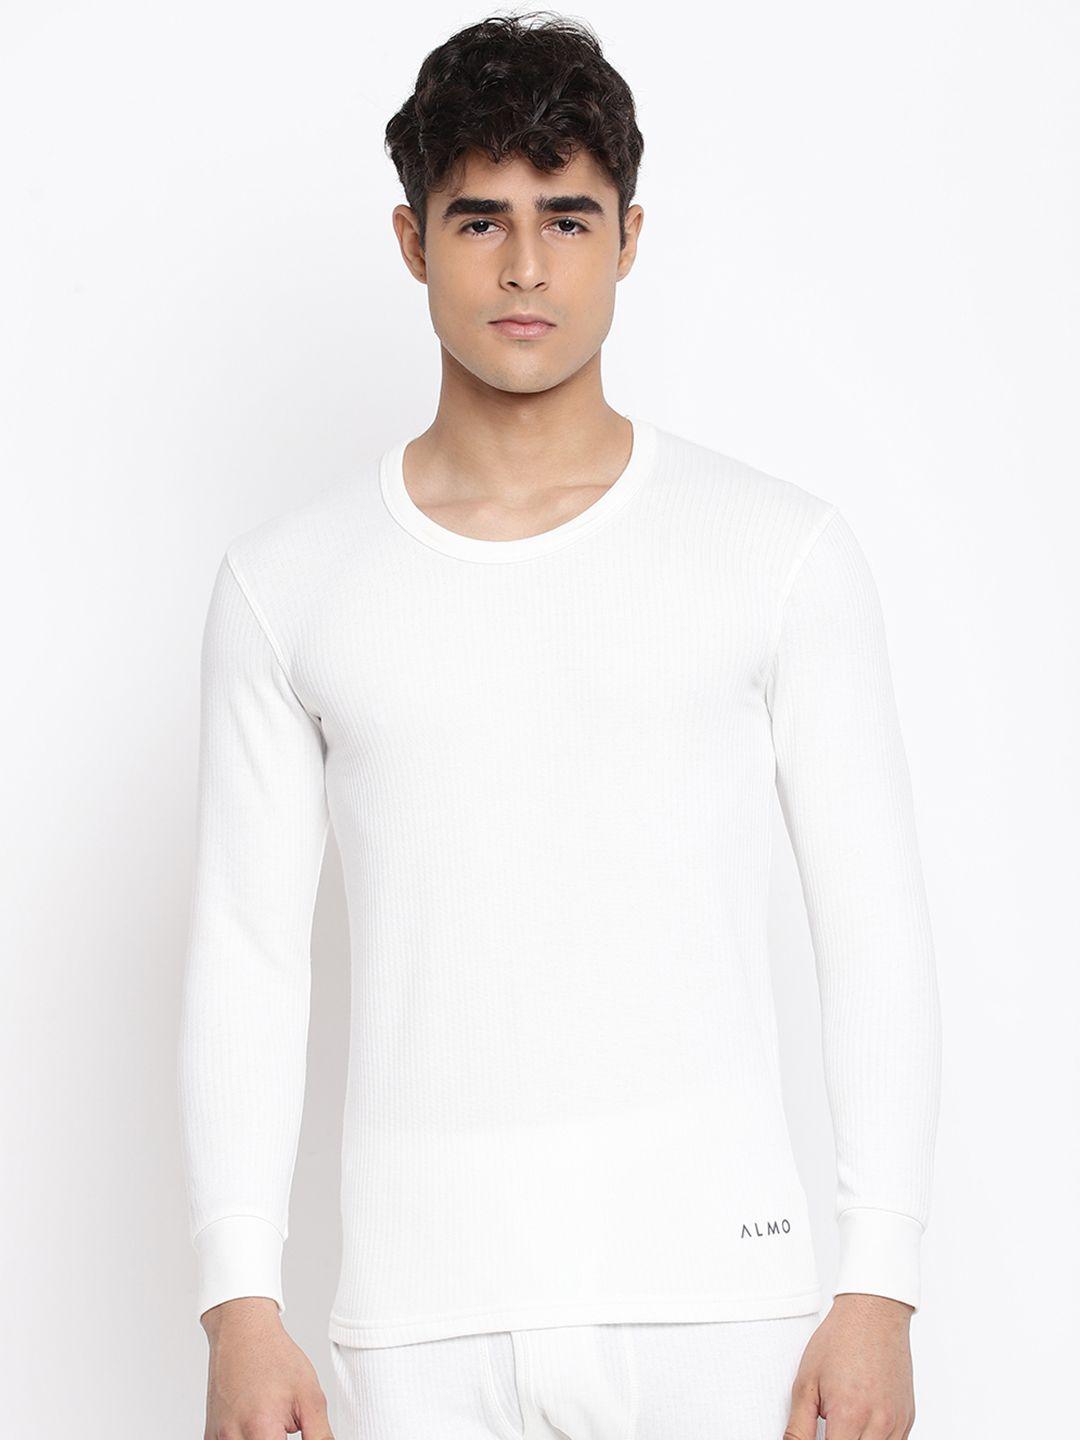 almo wear men white solid cotton ultra-warm thermal top